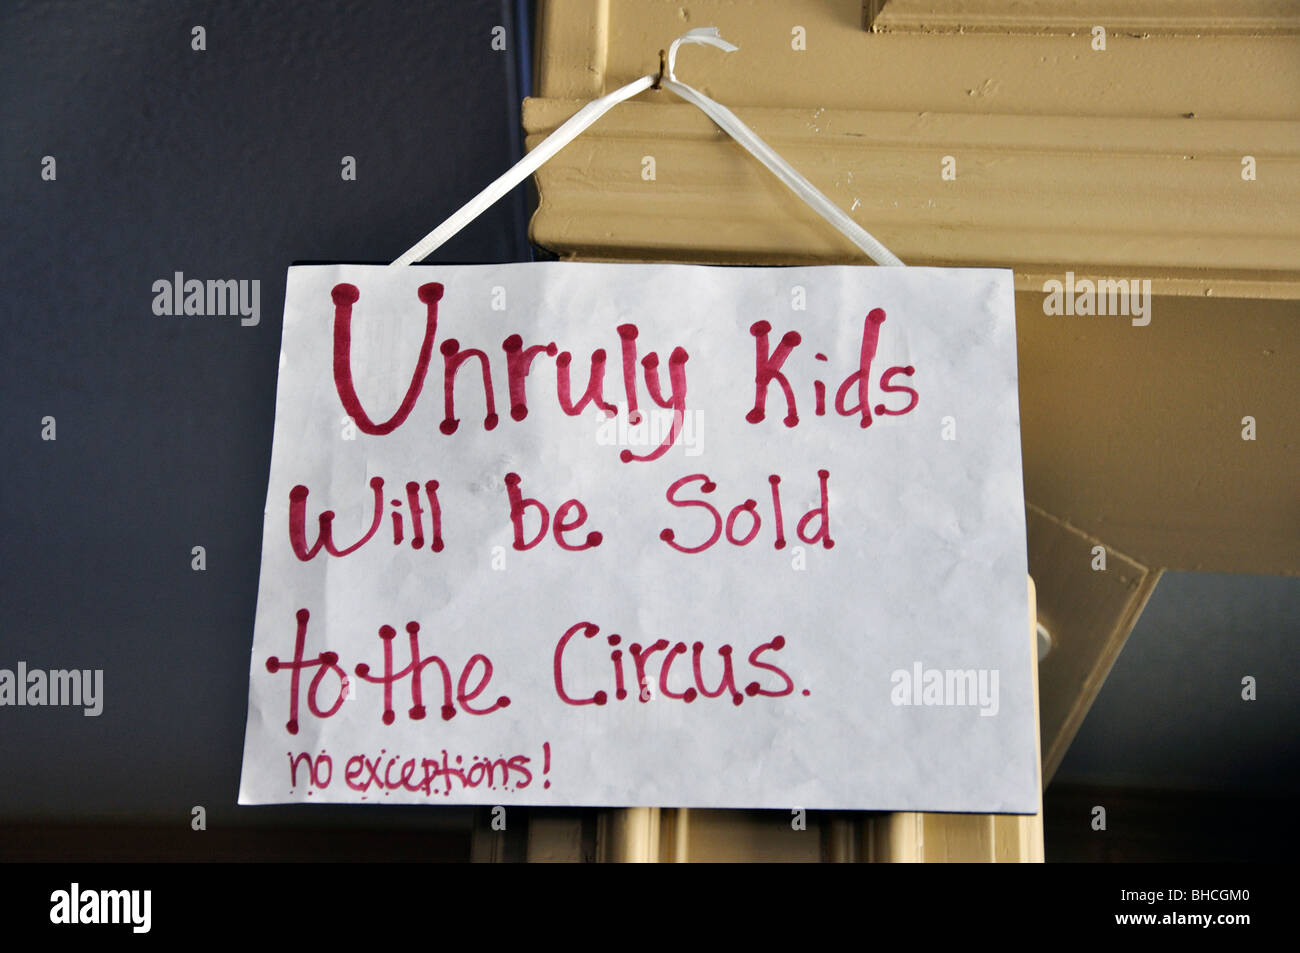 Unruly Kids sign in museum Stock Photo